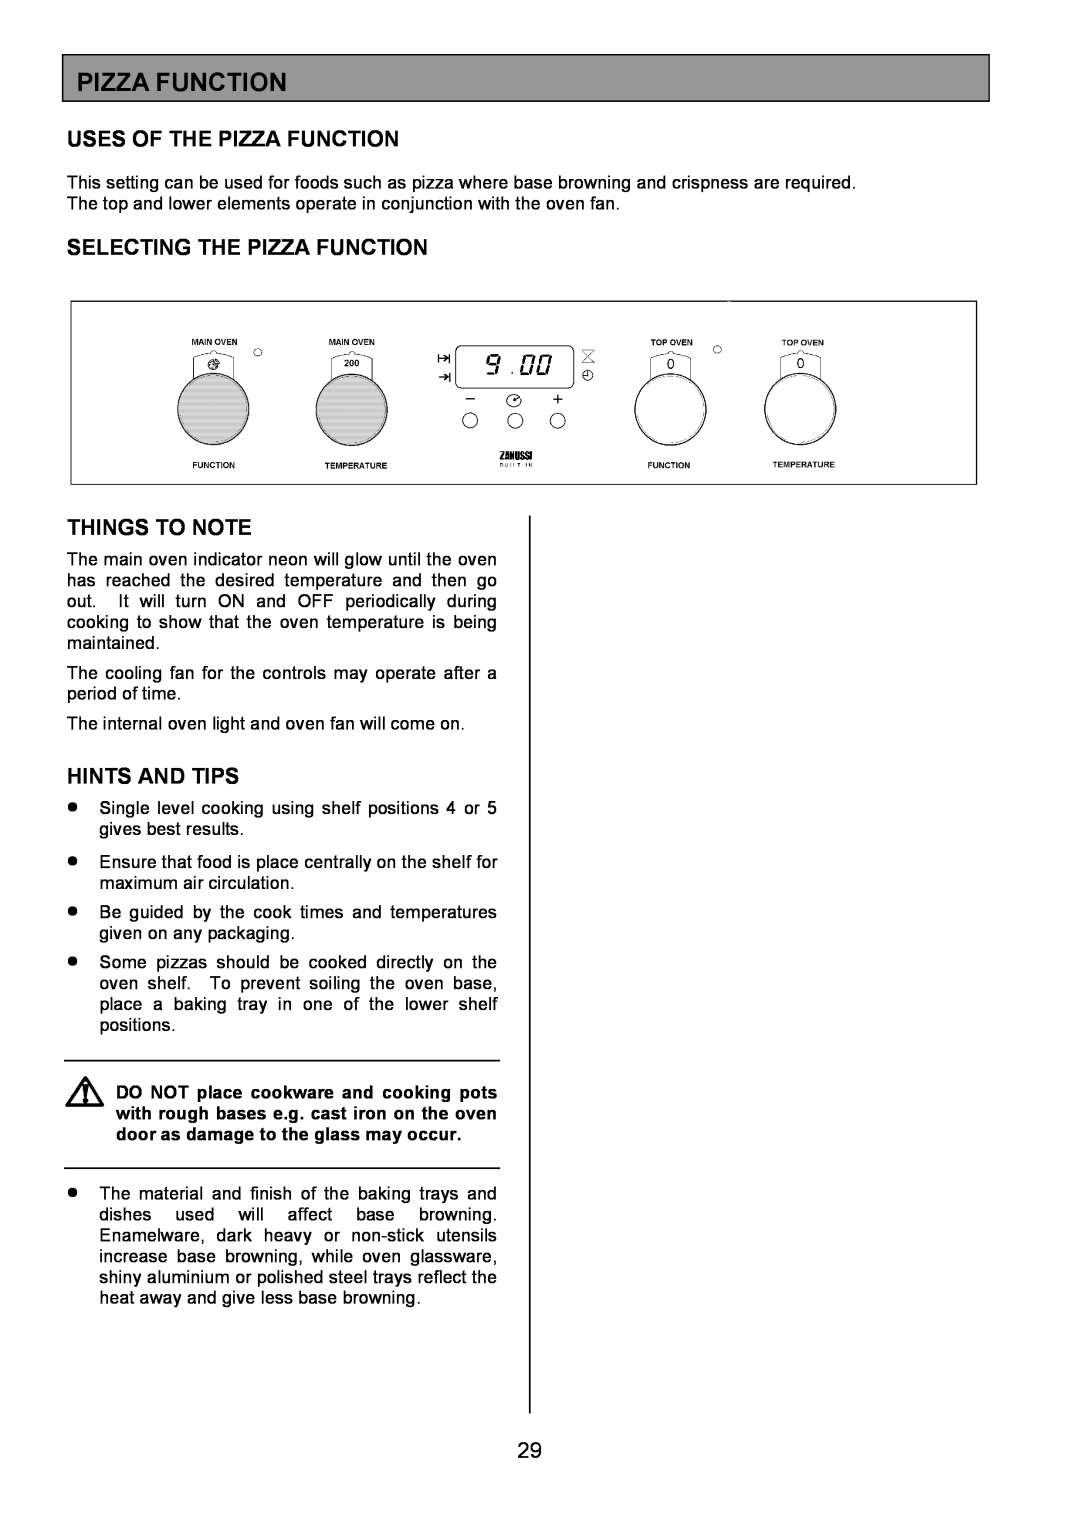 Zanussi ZDQ 695 manual Uses Of The Pizza Function, Selecting The Pizza Function, Things To Note, Hints And Tips 